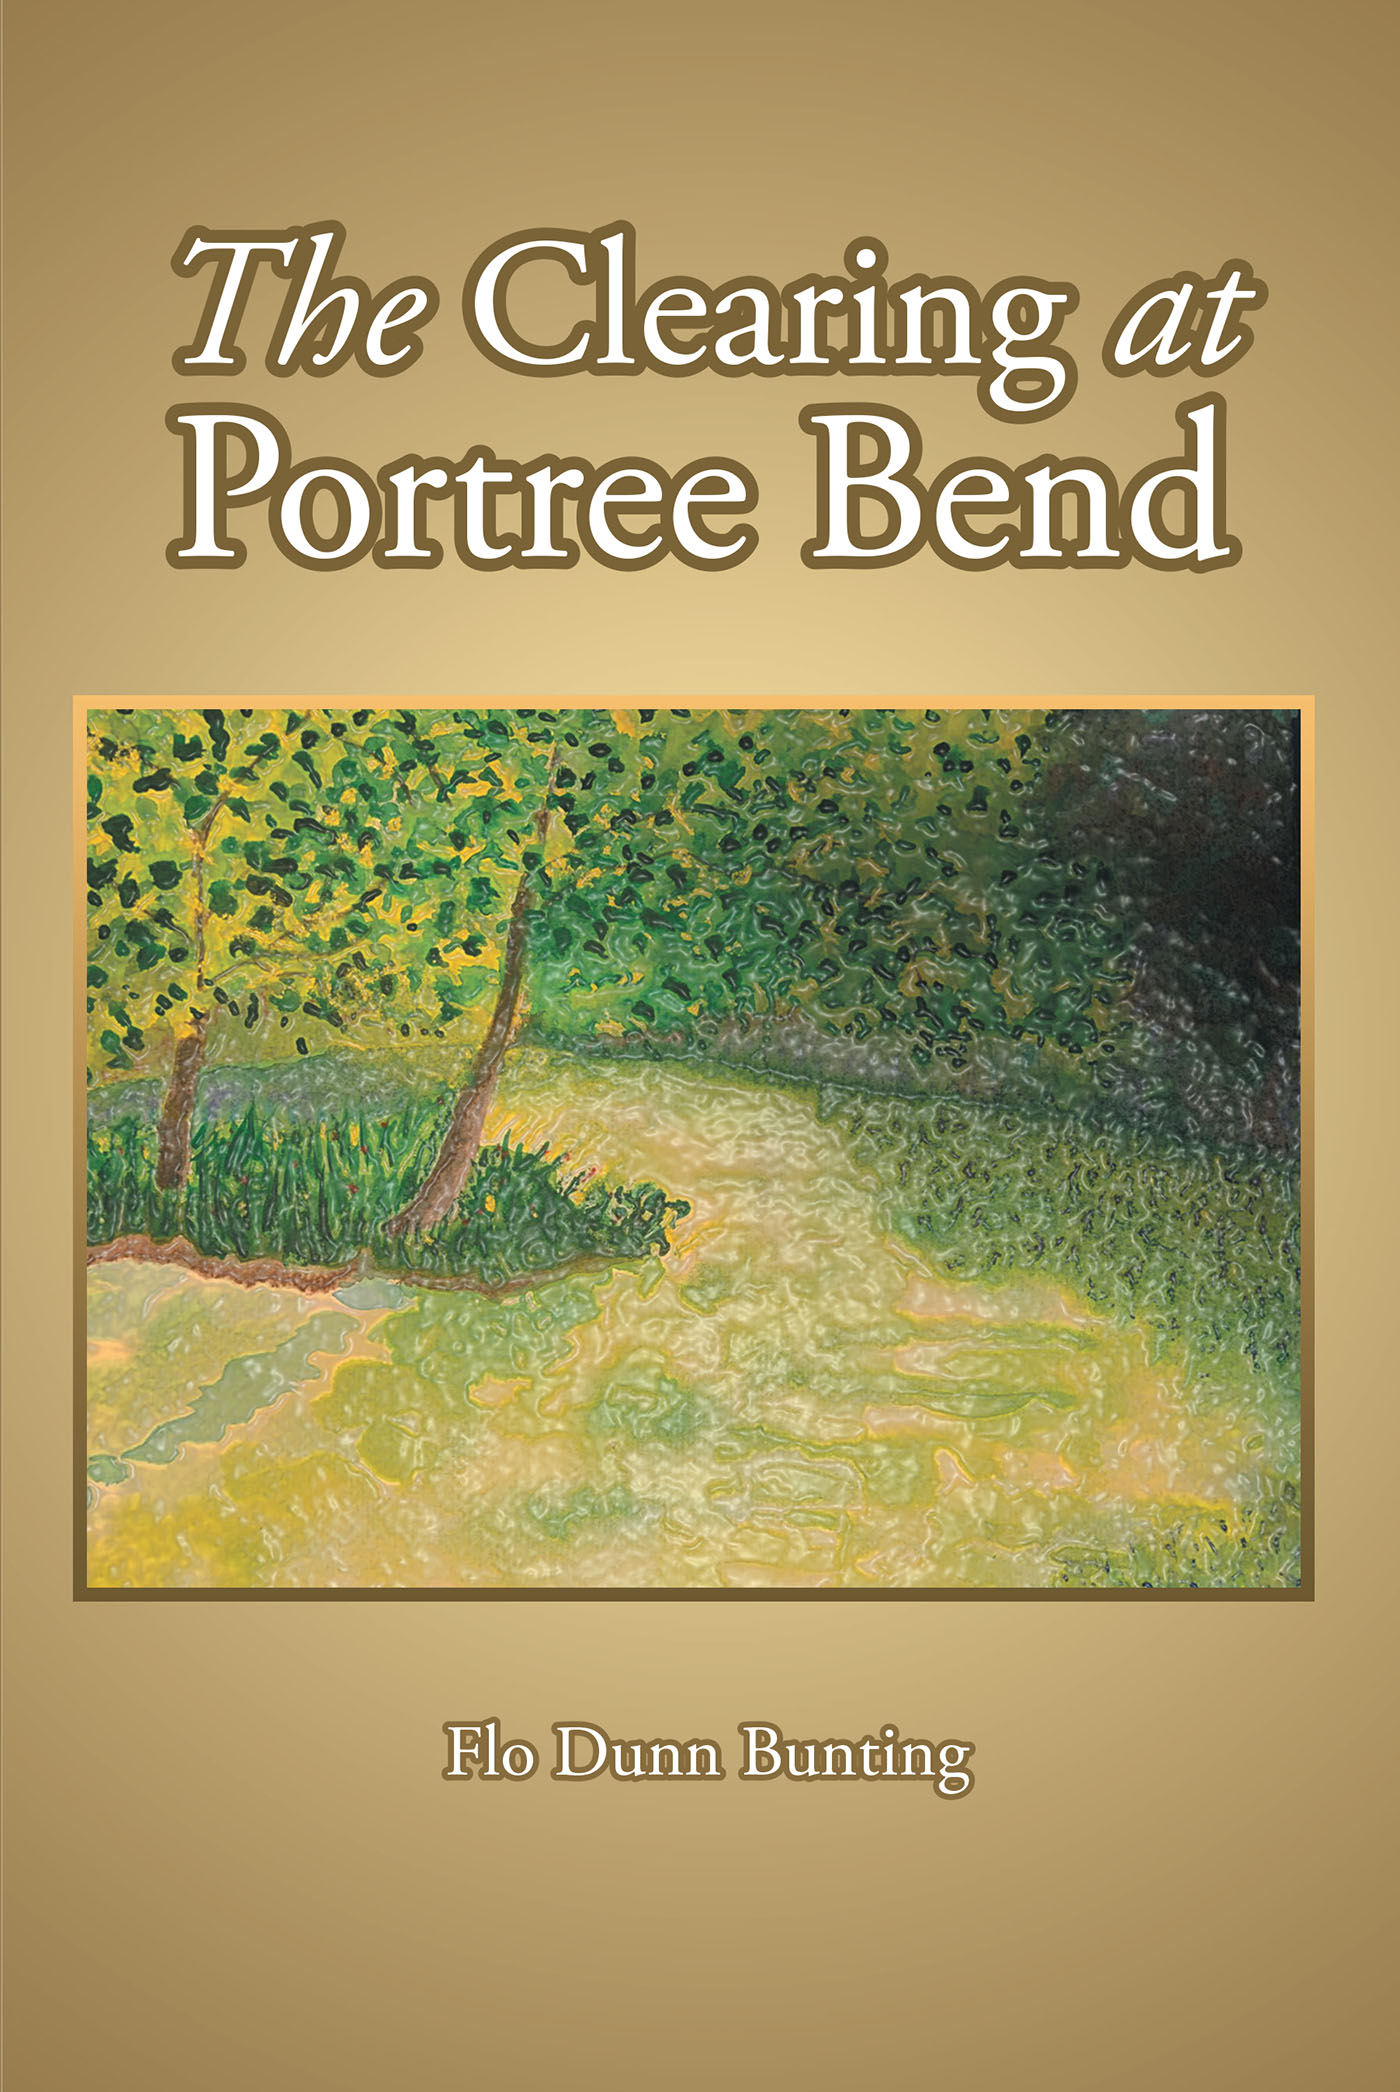 Author Flo Dunn Bunting’s New Book, "The Clearing at Portree Bend," is the Story of Five Unlikely Heroes Who Must Band Together to Protect Their Hometown from Evil